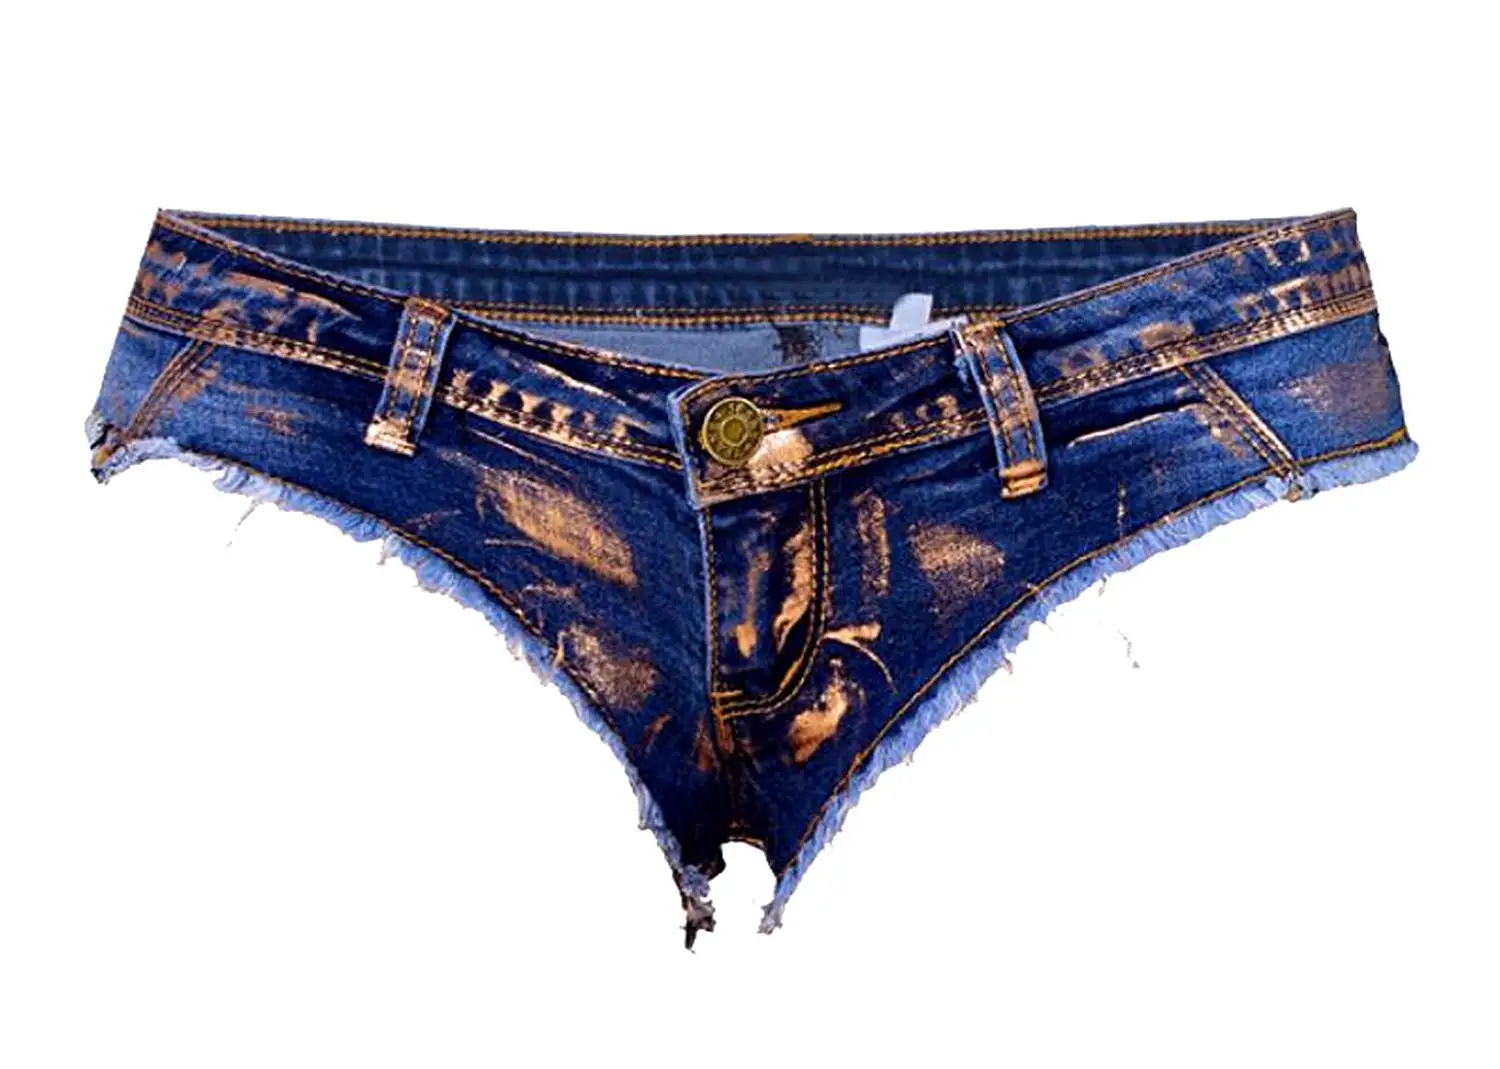 Cheap Thong Jean Shorts Find Thong Jean Shorts Deals On Line At 1262